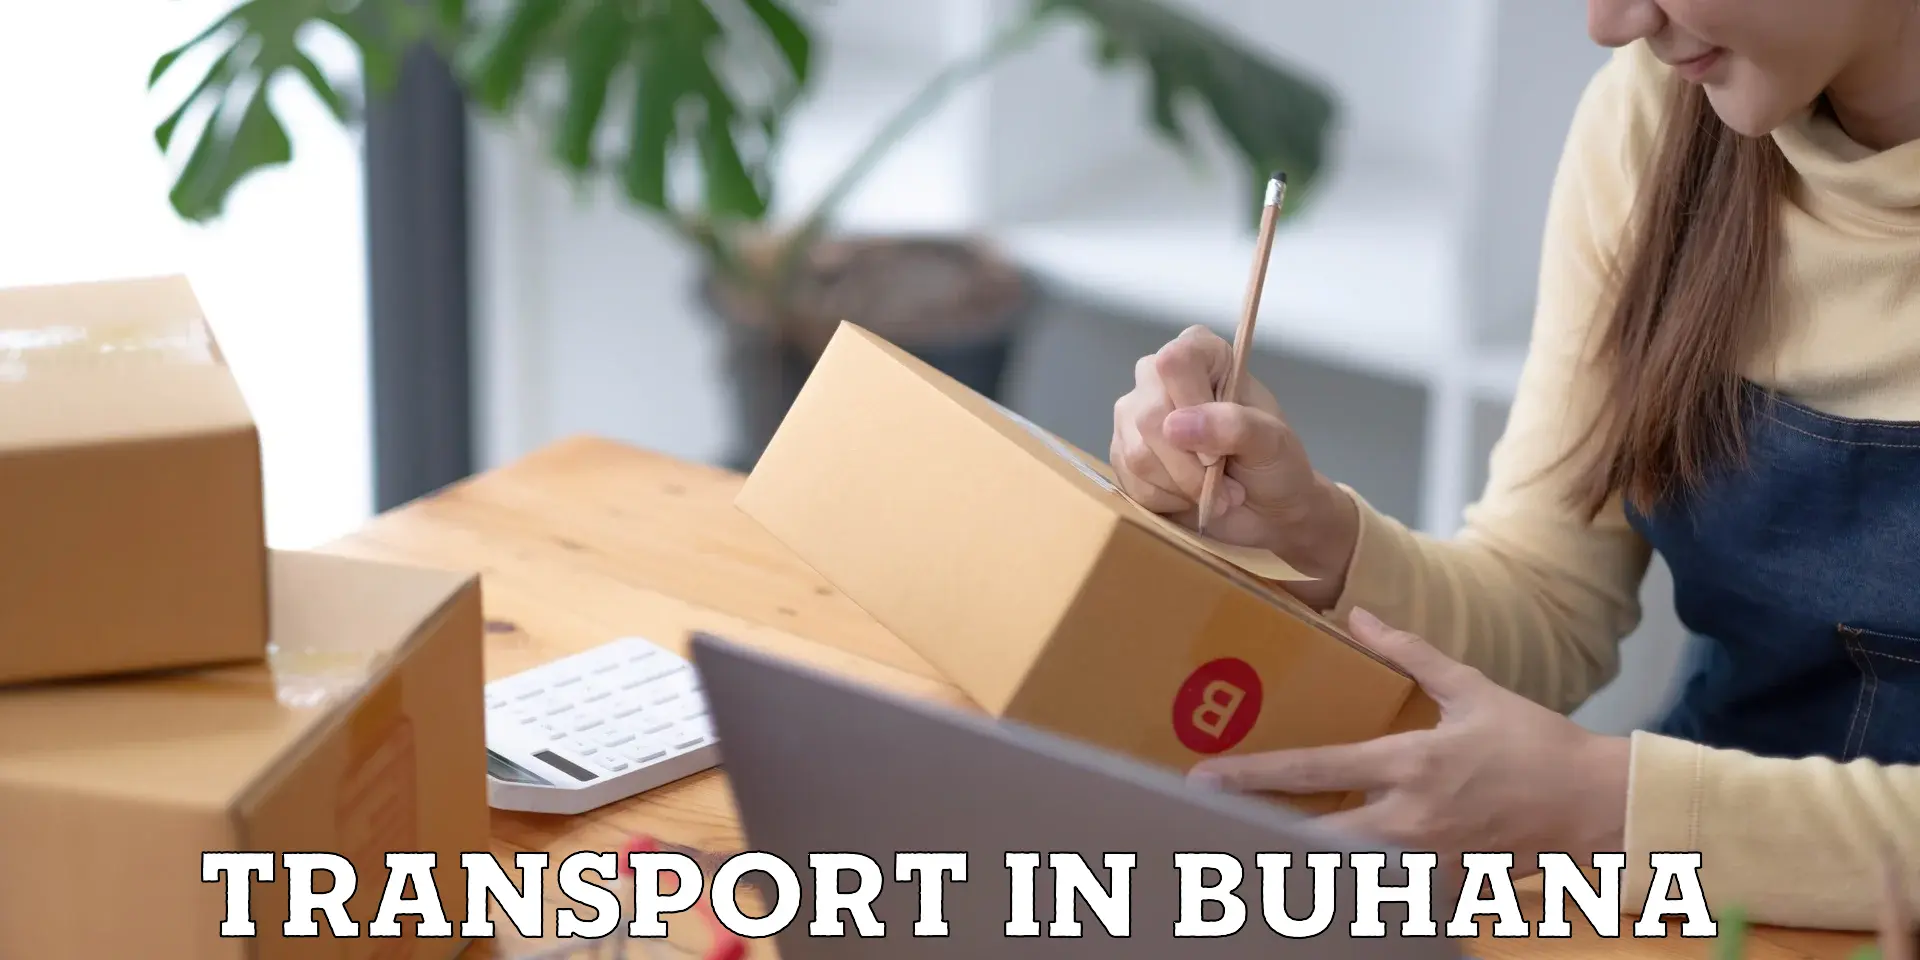 Interstate transport services in Buhana